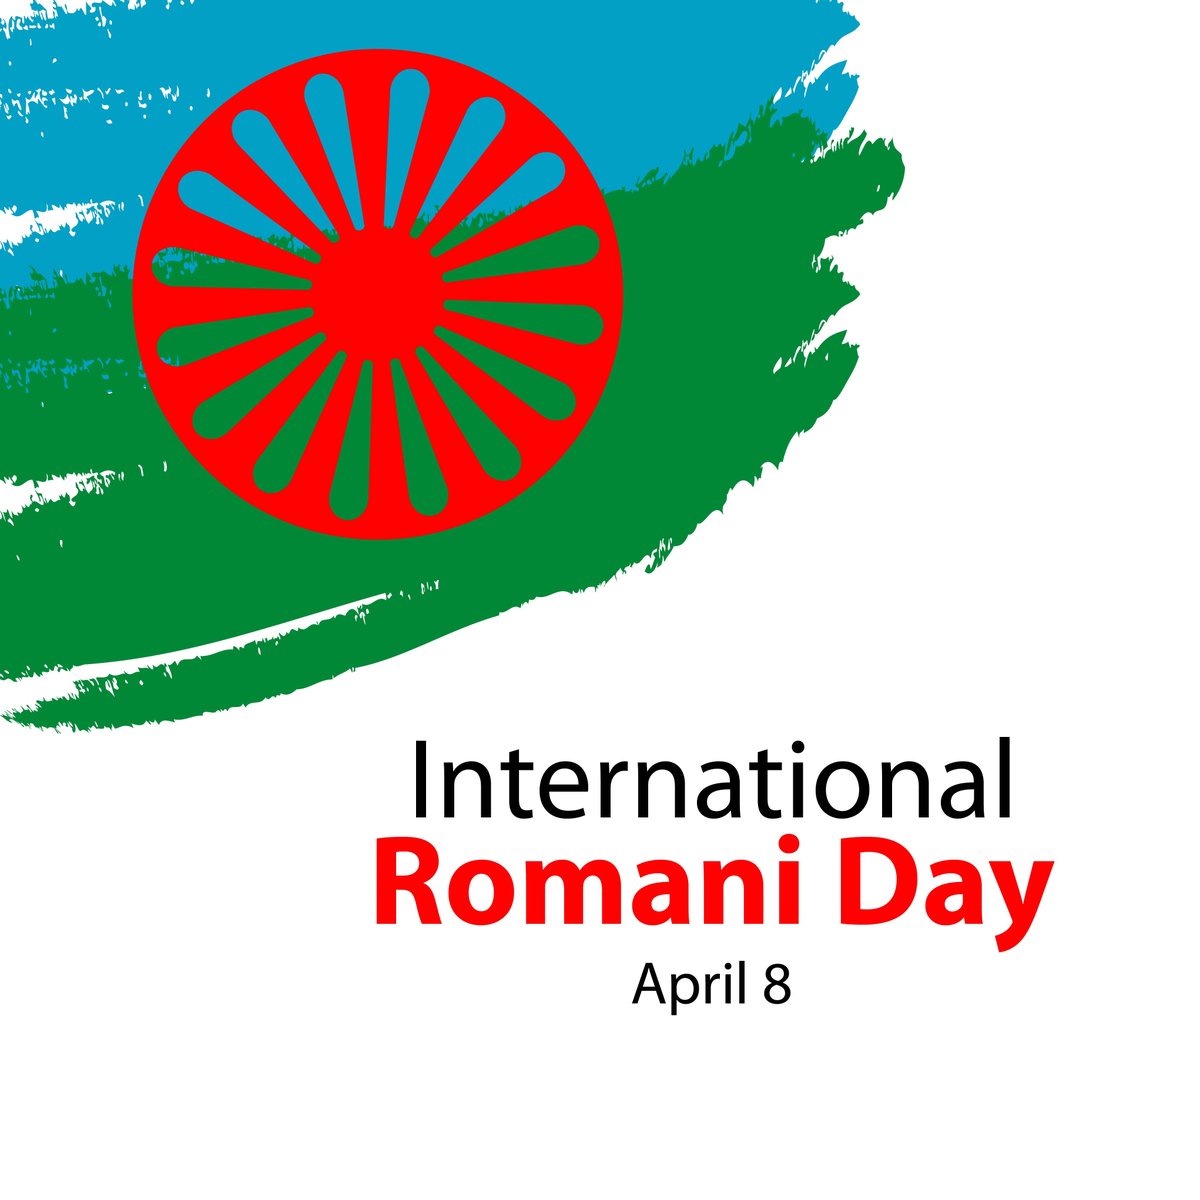 On #InternationalRomaDay, UNDP in Ukraine, alongside @UN_Ukraine & other UN agencies, joins communities across the world to celebrate Roma culture & history, and to highlight the challenges Roma people face in their daily lives. Read more: ukraine.un.org/en/265423-join…